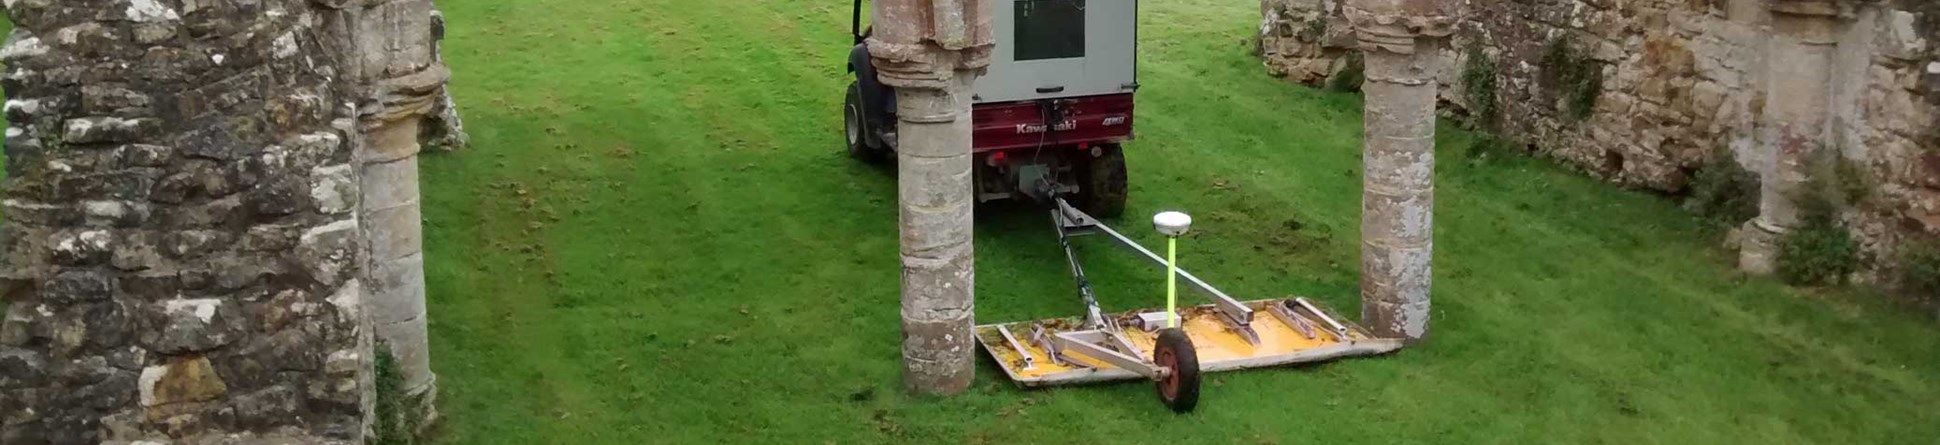 Revealing Lost Buildings At Bayham Old Abbey Historic England - a vehicle towing geophysical survey equipment passing through an arch within medieval ruins